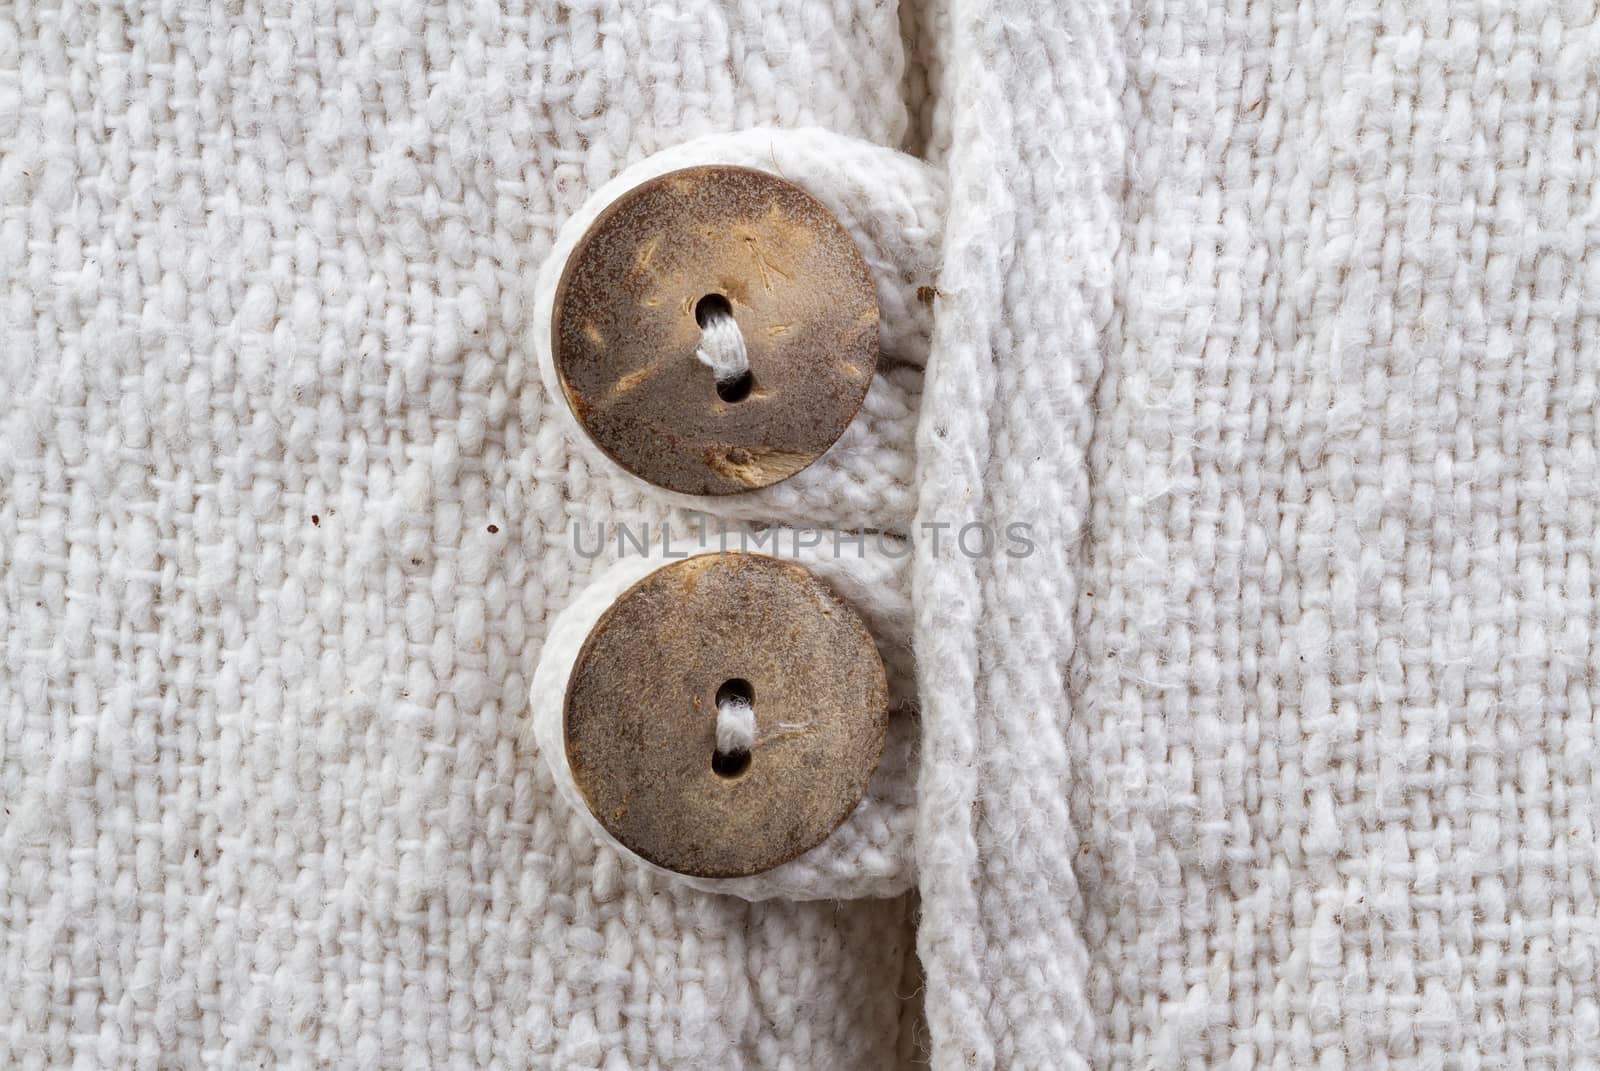 Natural texture cotton fabric with wooden button by supersaiyan